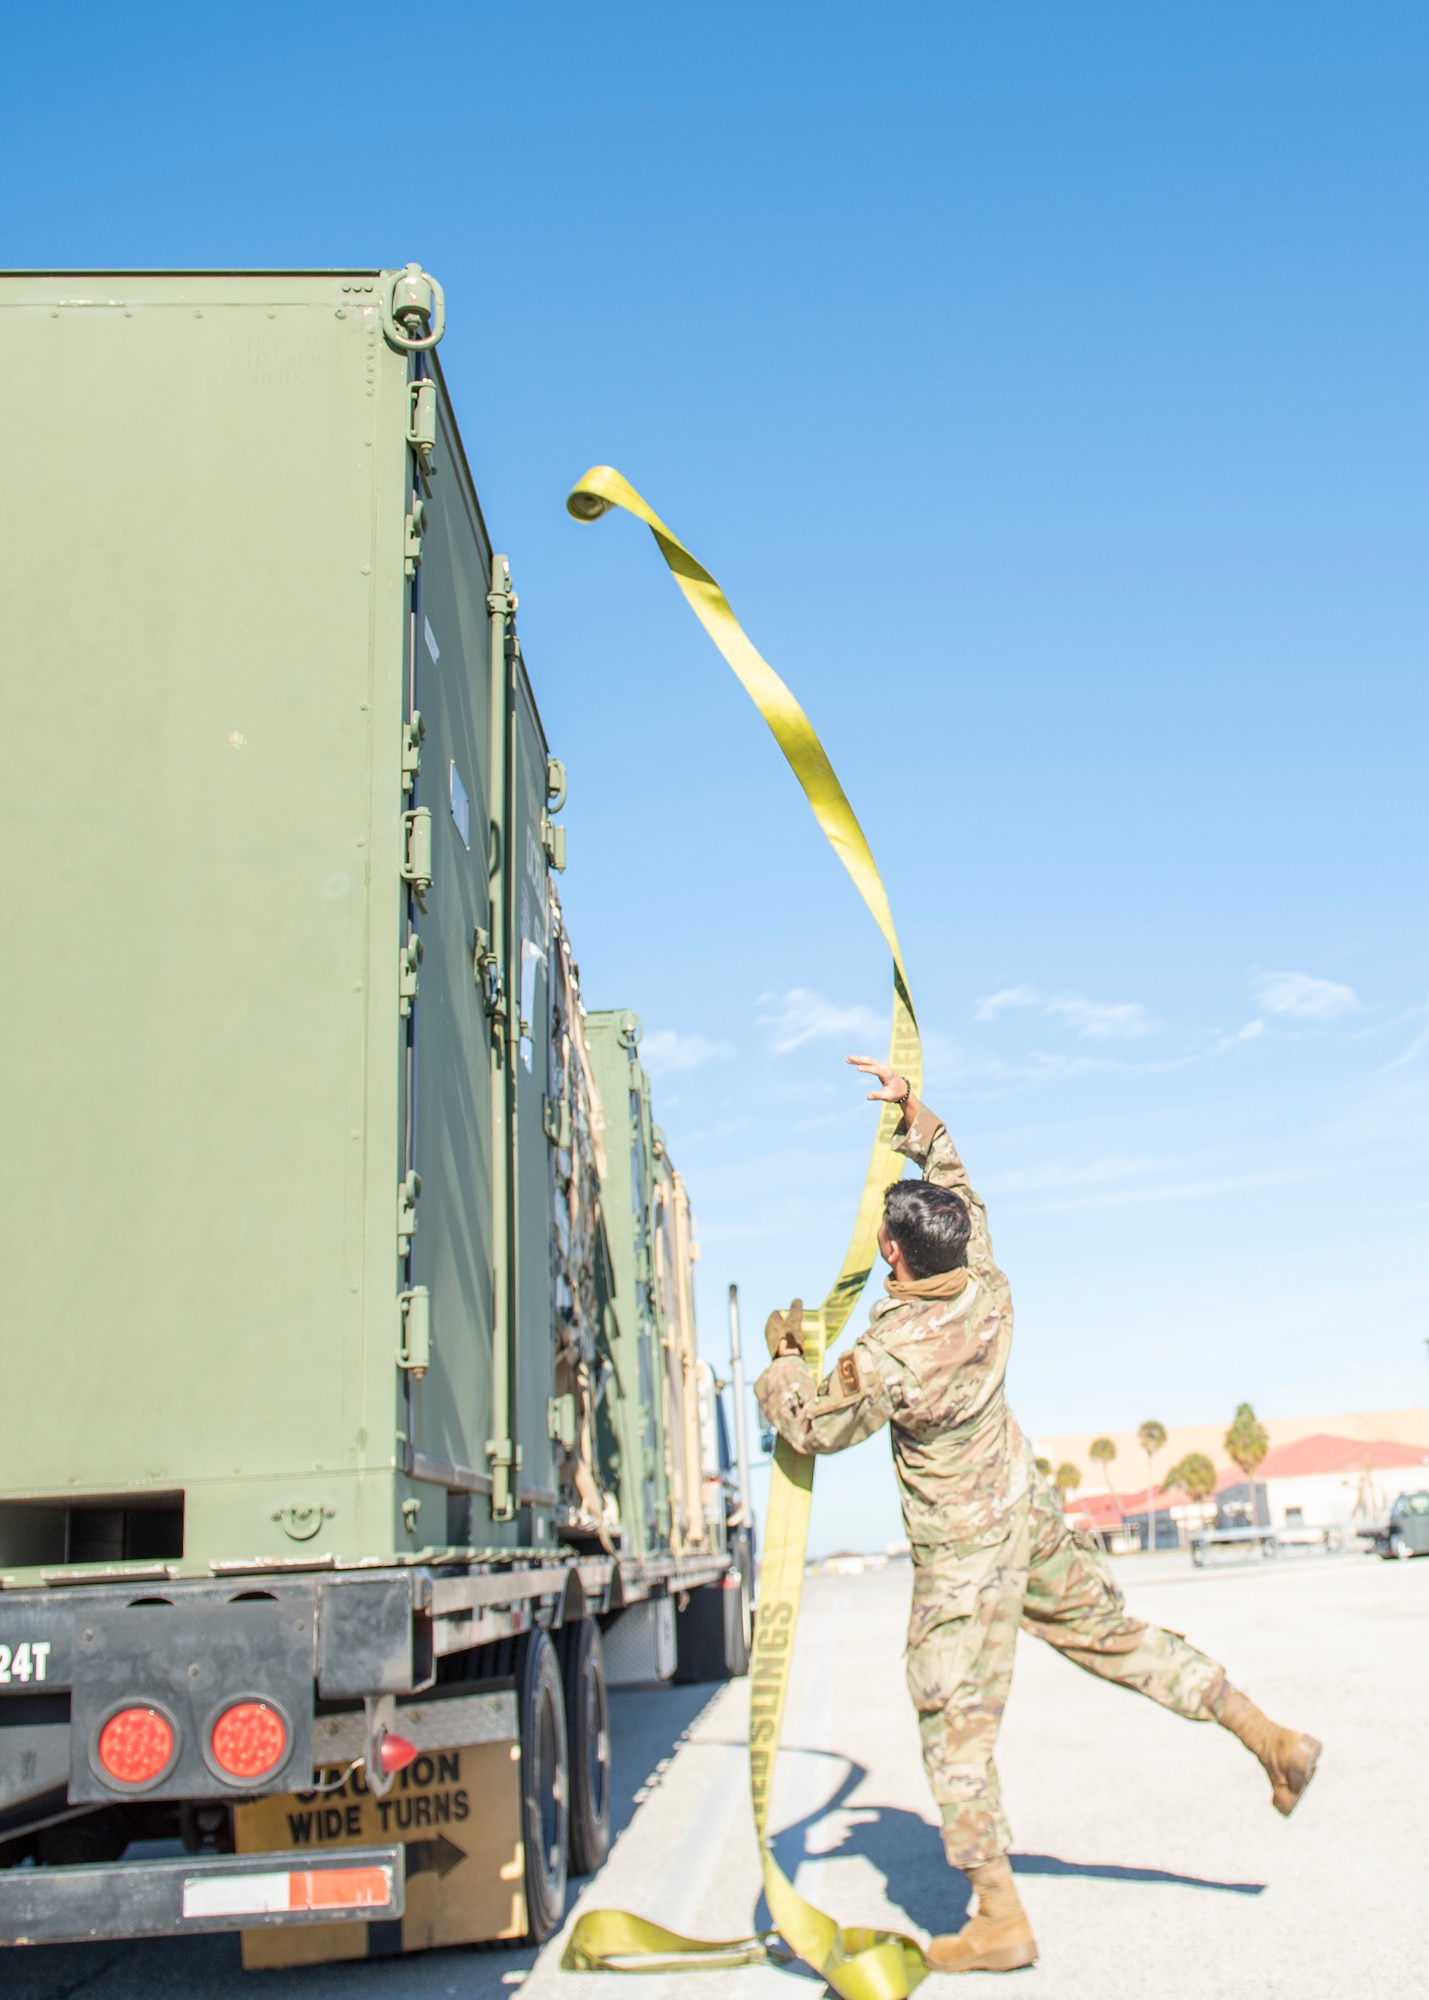 U.S. Air Force Airman 1st Class Felix Alvarez, a 6th Logistics Readiness Squadron (LRS) dispatch operator, tosses a cargo rope during a joint deployment exercise at MacDill Air Force Base, Florida, Feb. 1, 2022.